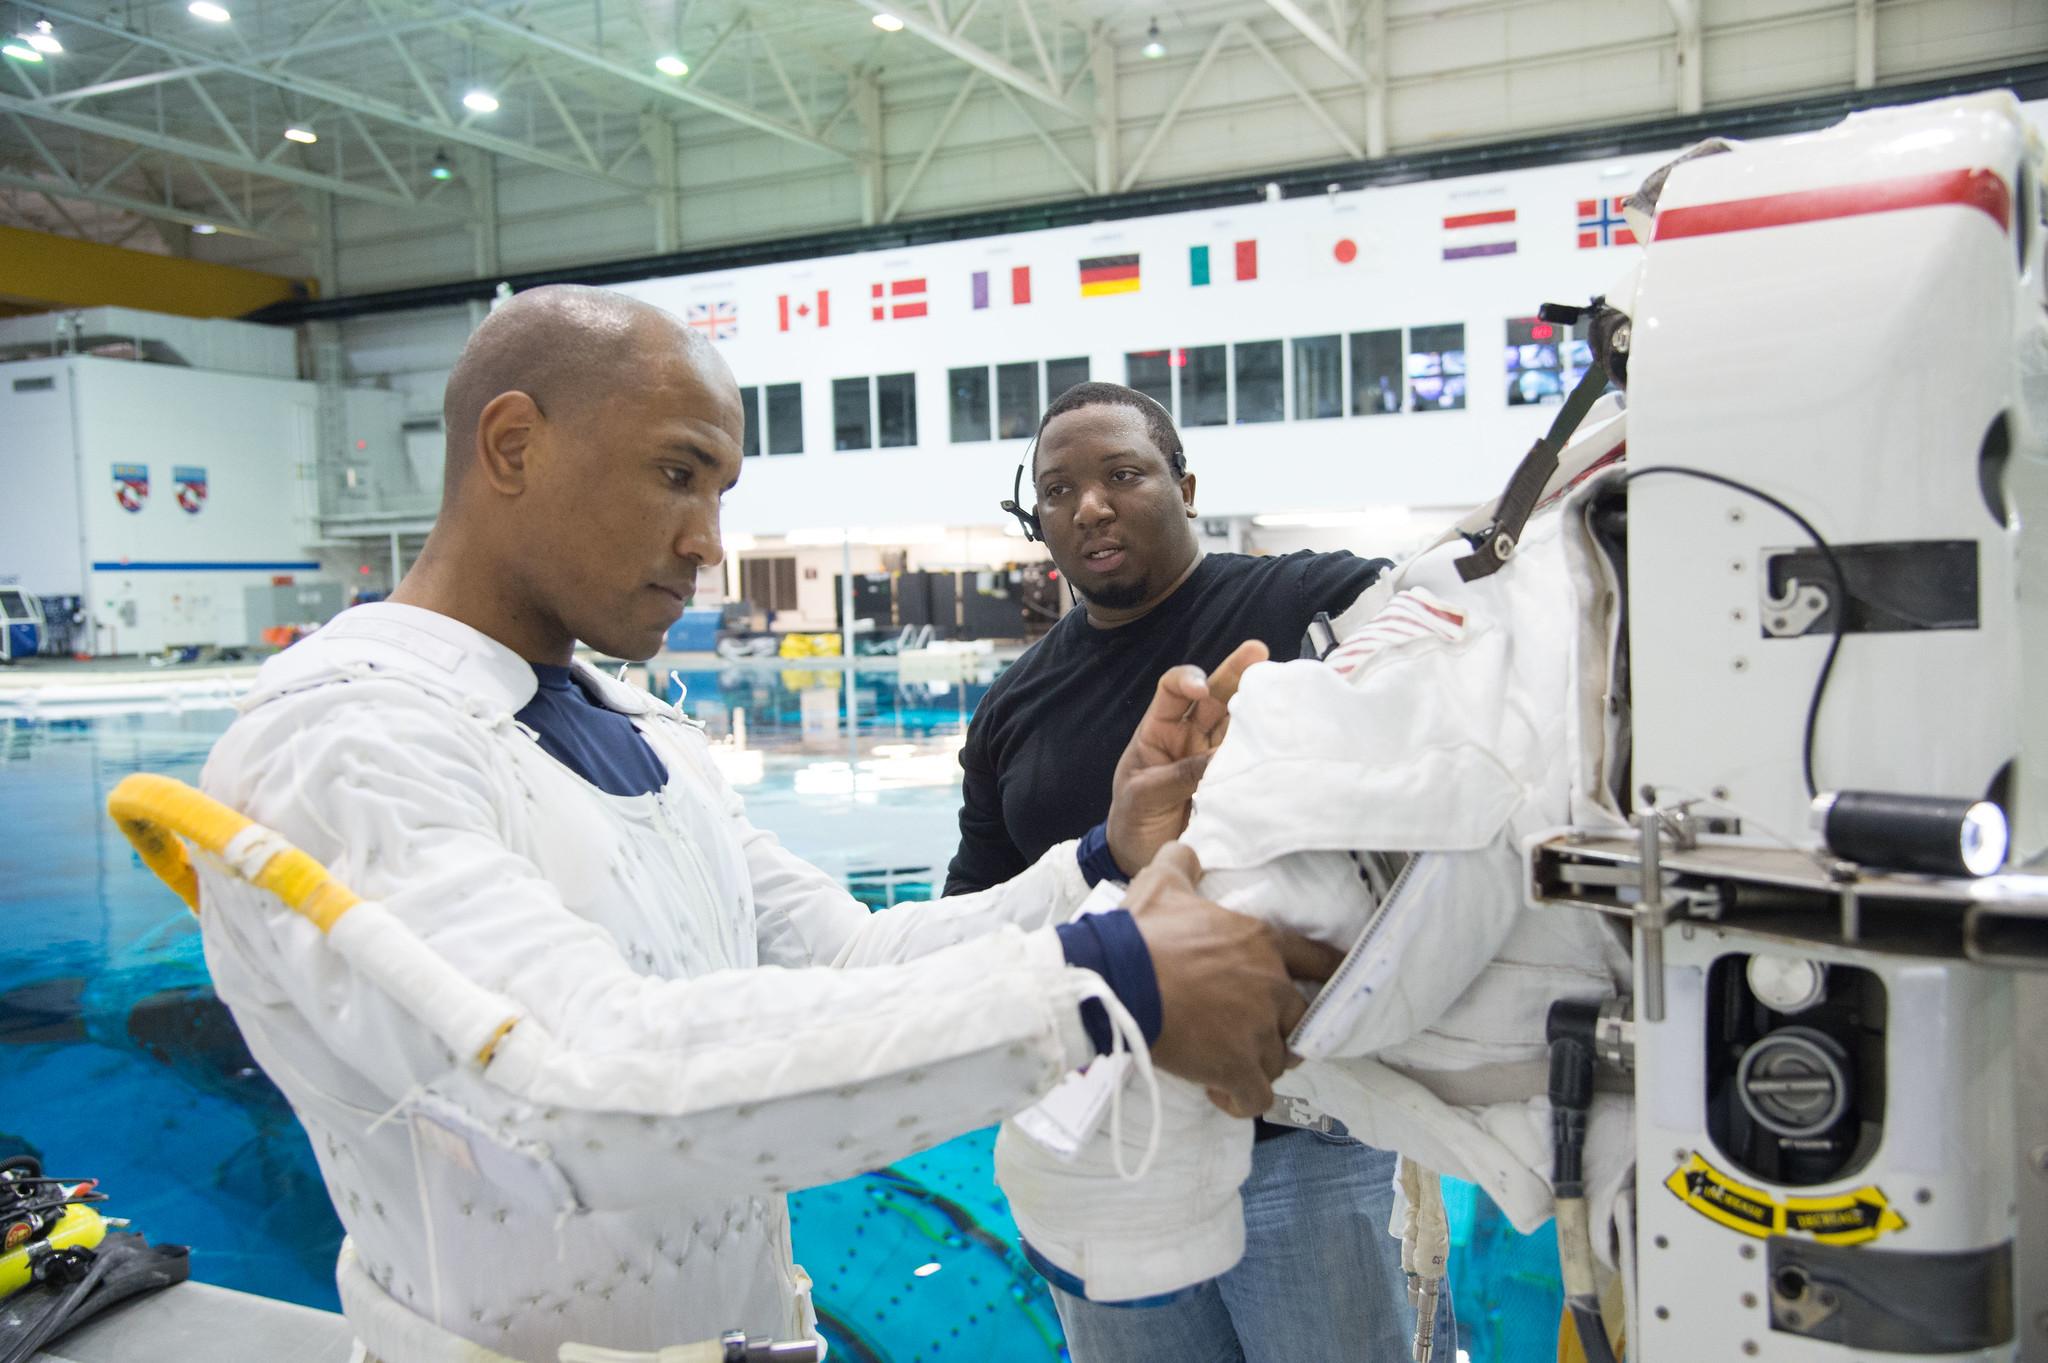 Astronaut Victor Glover during his Extravehicular Activity training with Doug Wheelock